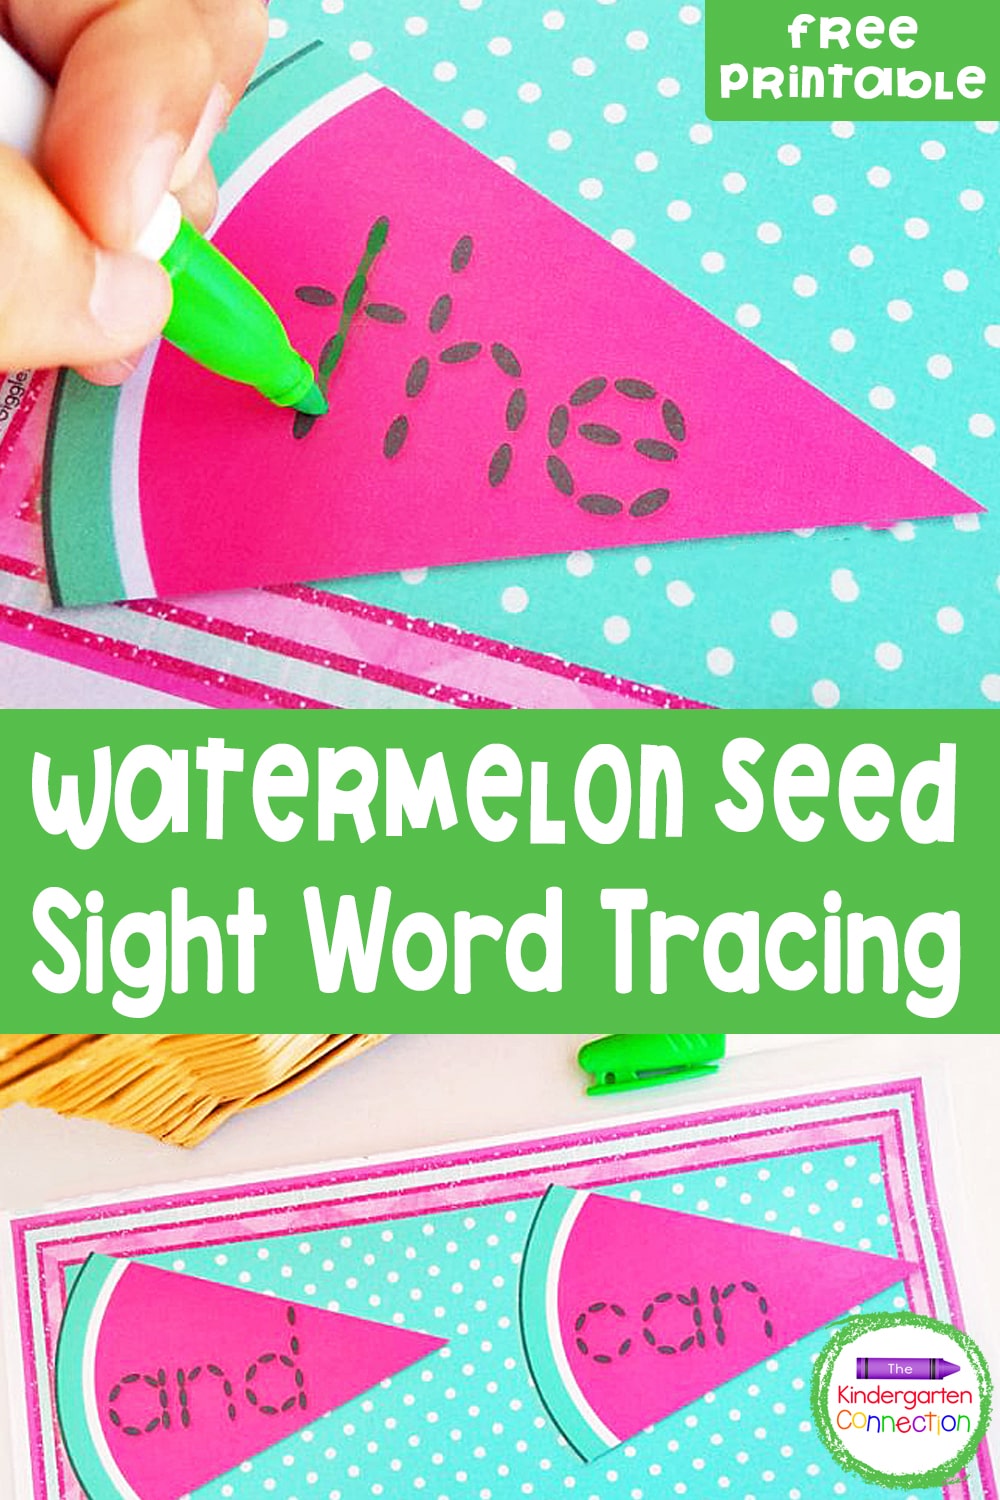 Grab this FREE Watermelon Seed Sight Word Tracing Activity and place it in your literacy center for some sight word fun! Children LOVE watermelon and they're going to really enjoy practicing sight words in a fun new way!